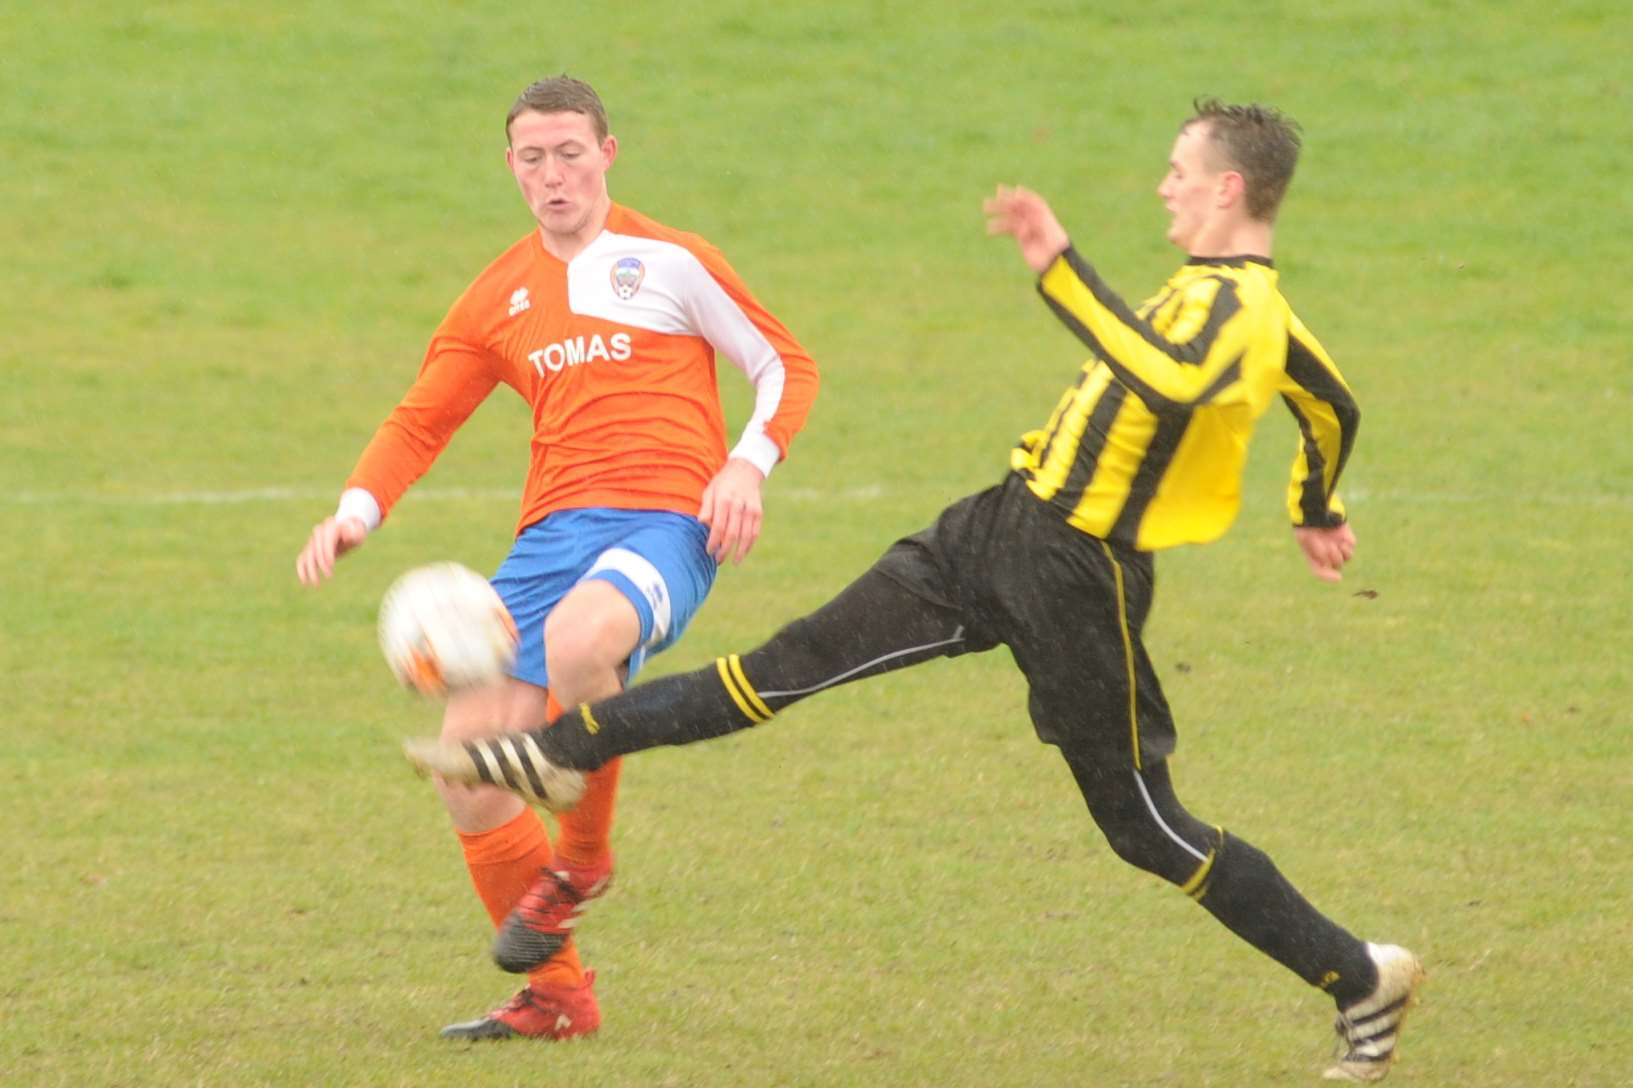 Meopham Colts on the stretch against Cuxton 91 in Under-18 Division 2 Picture: Steve Crispe